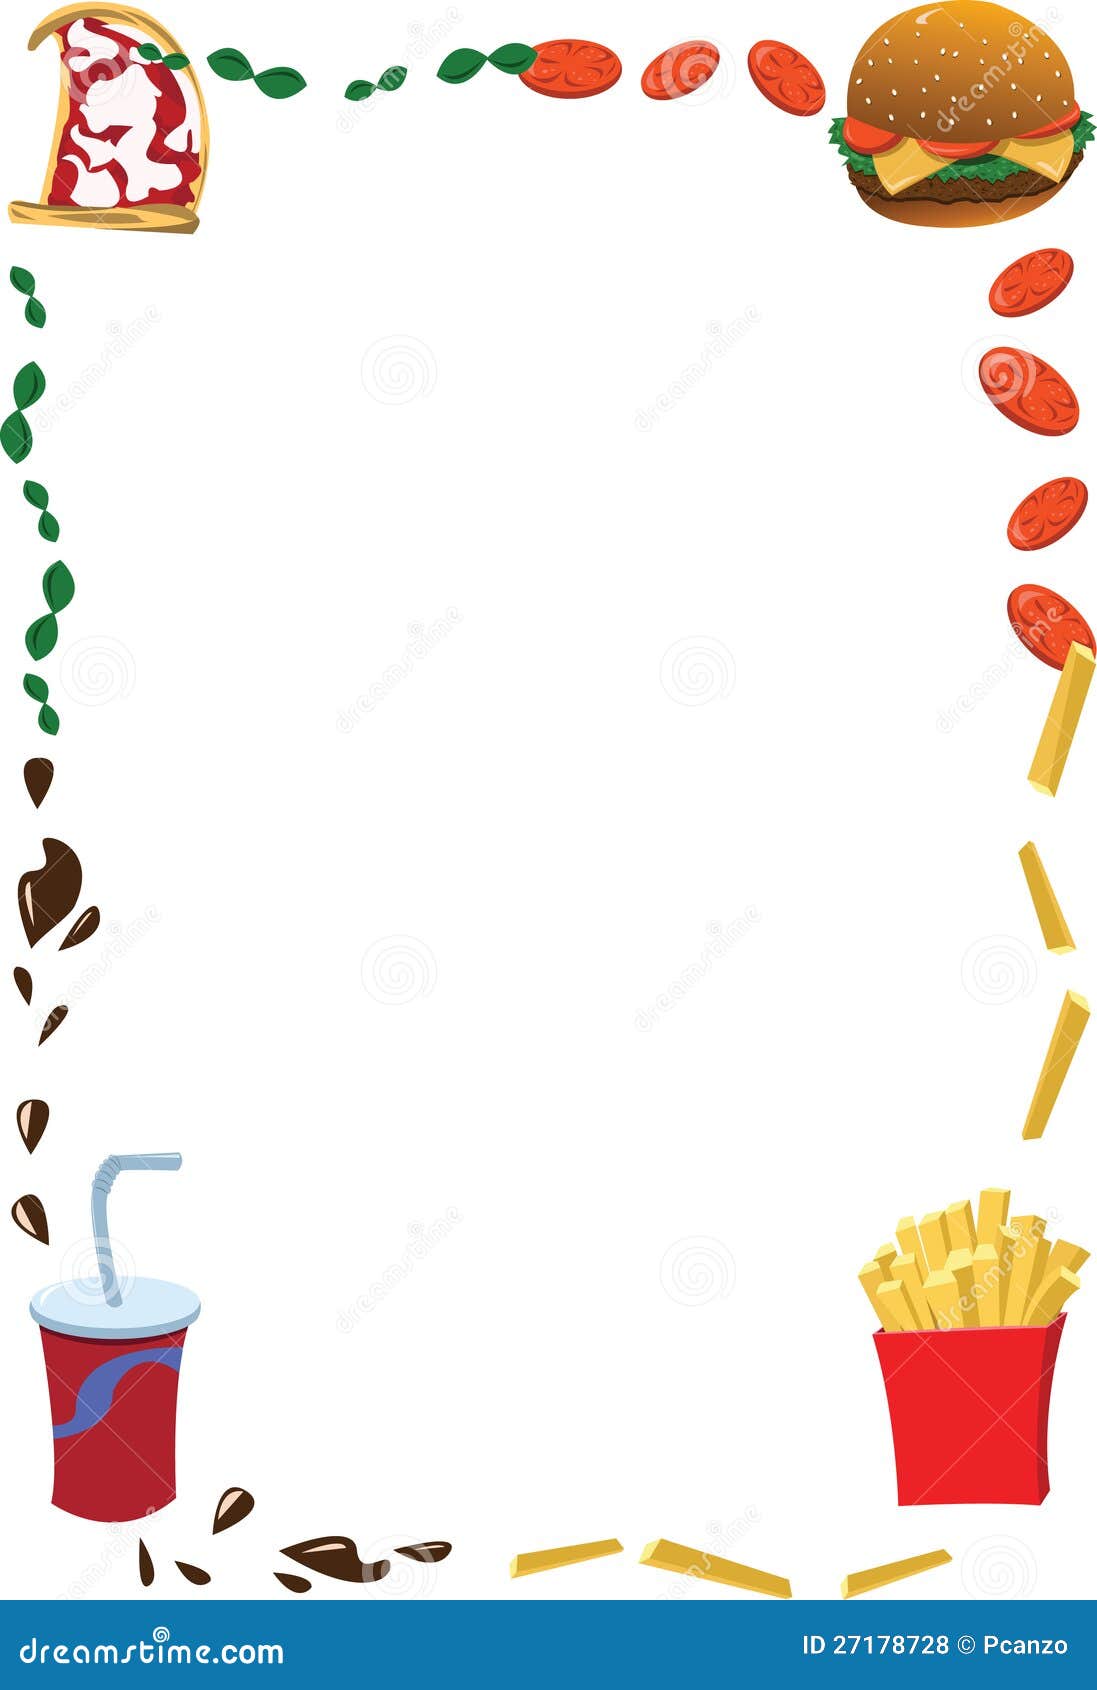 Vertical Fast Food Frame Royalty Free Stock Photos - Image ...